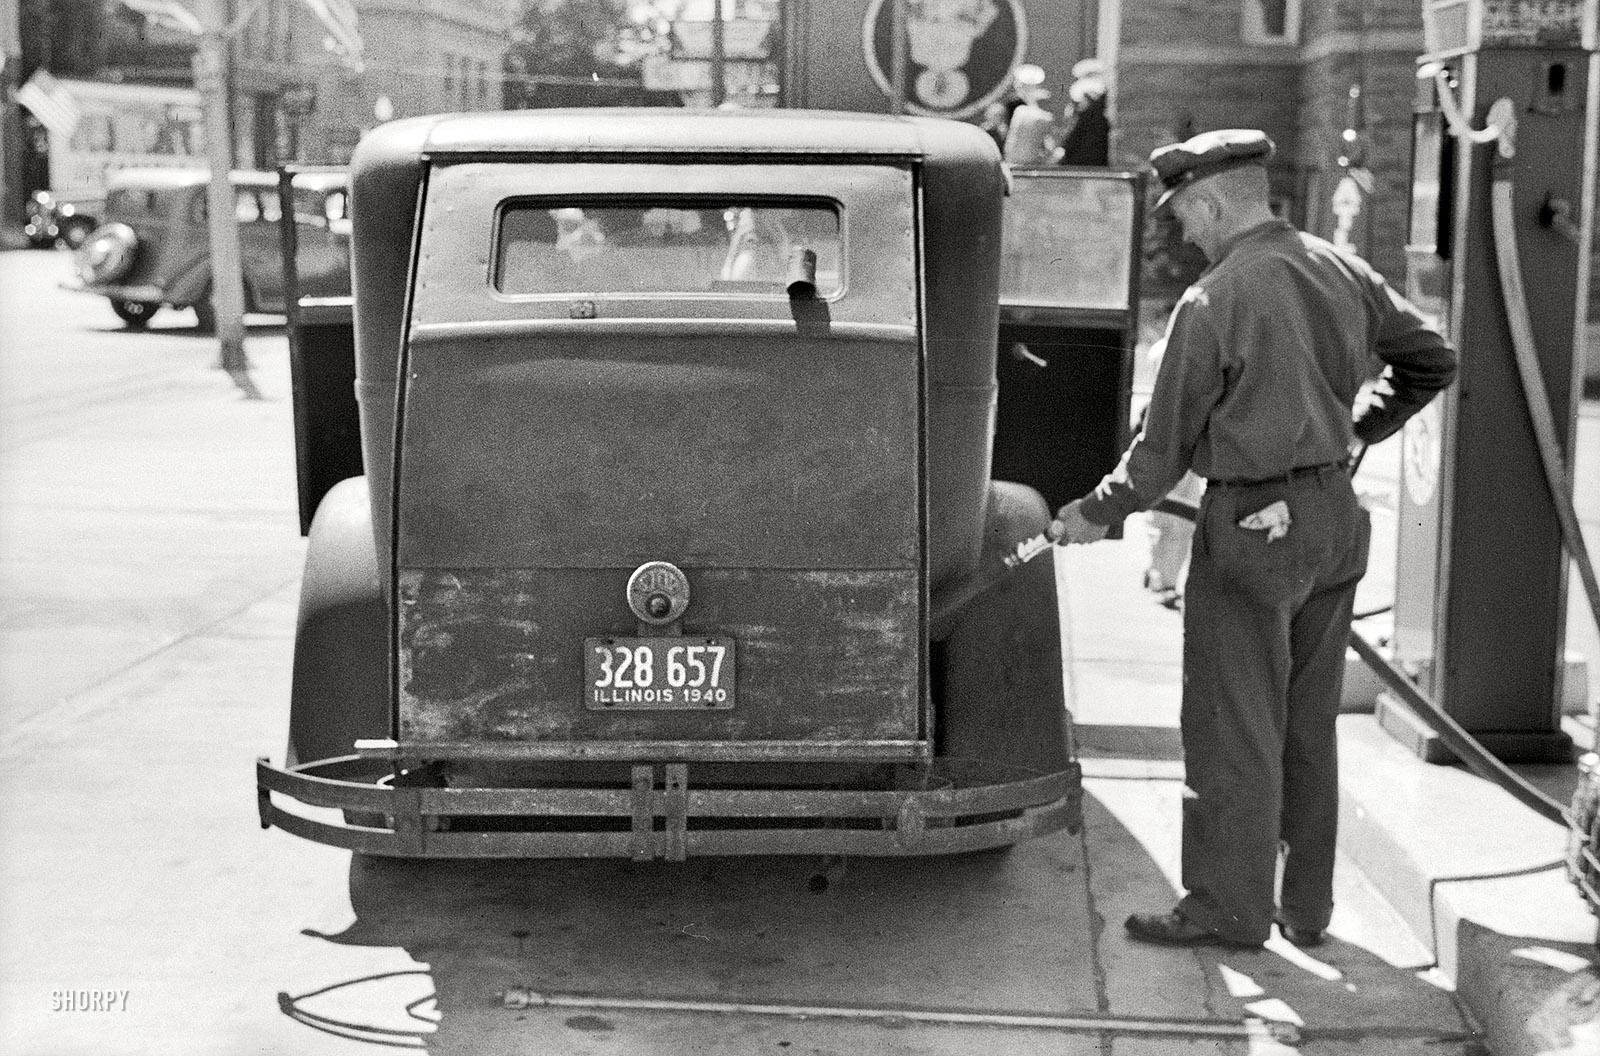 July 1940. "Auto of migrant fruit worker at gas station in Sturgeon Bay, Wisc." Photo by John Vachon for the Farm Security Administration. View full size.